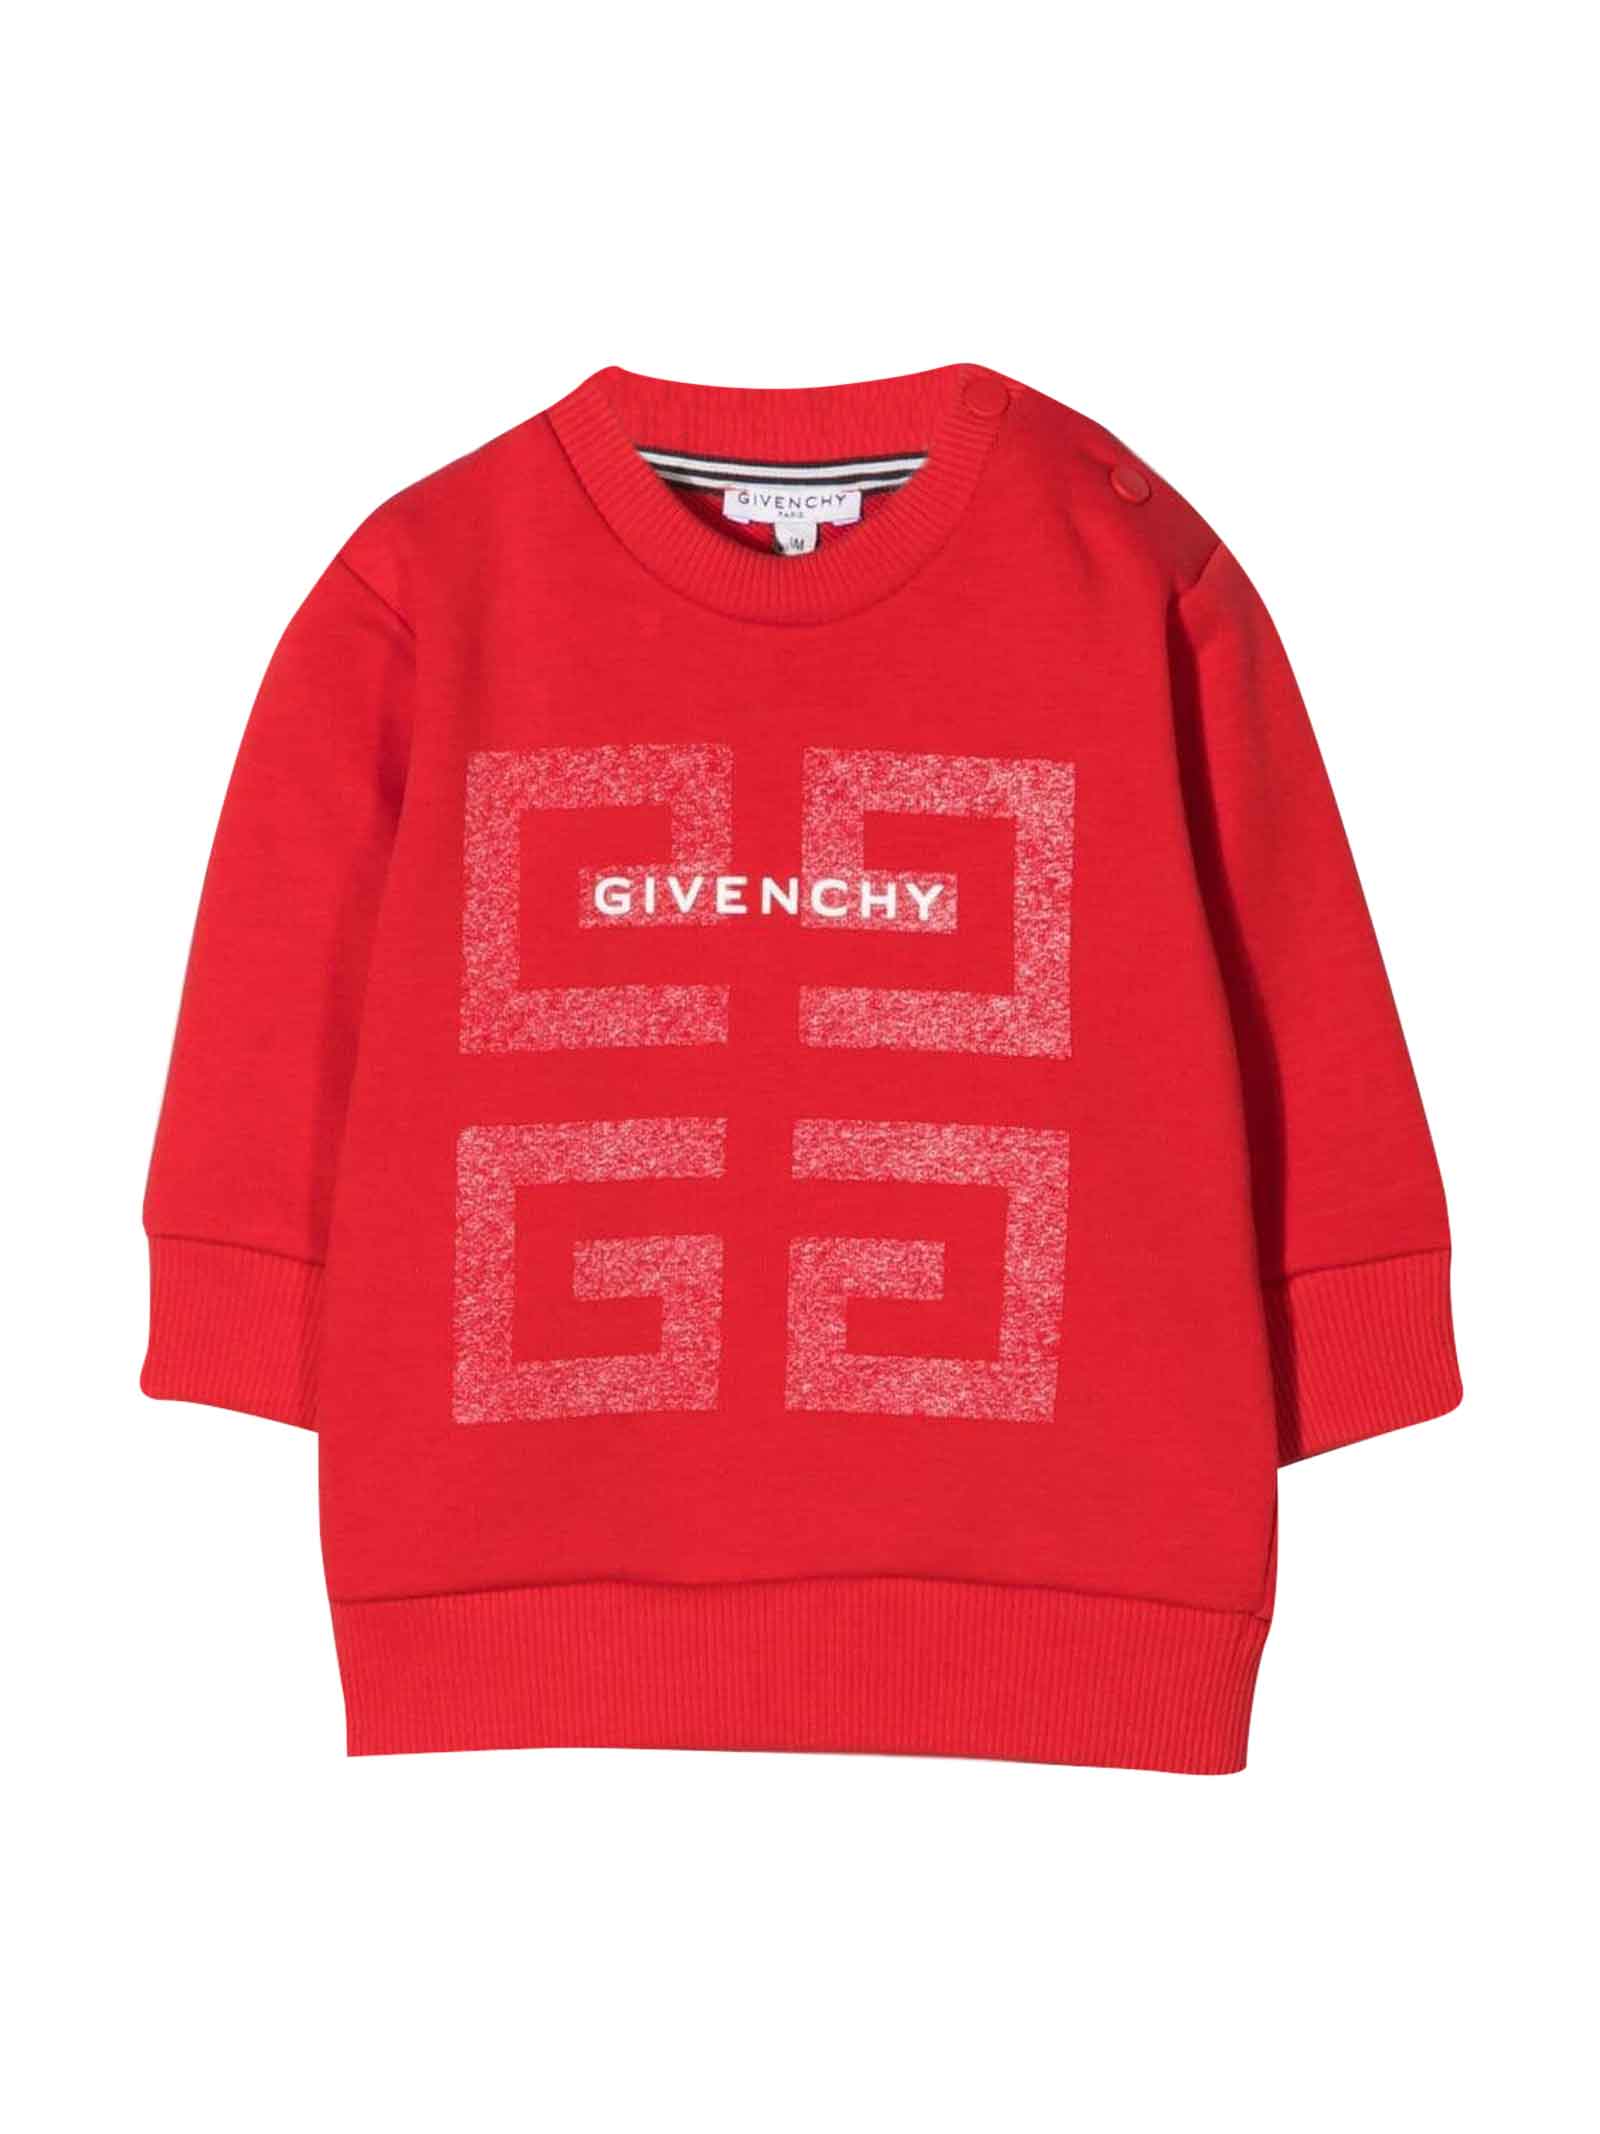 Givenchy Red Unisex Sweatshirt With Print